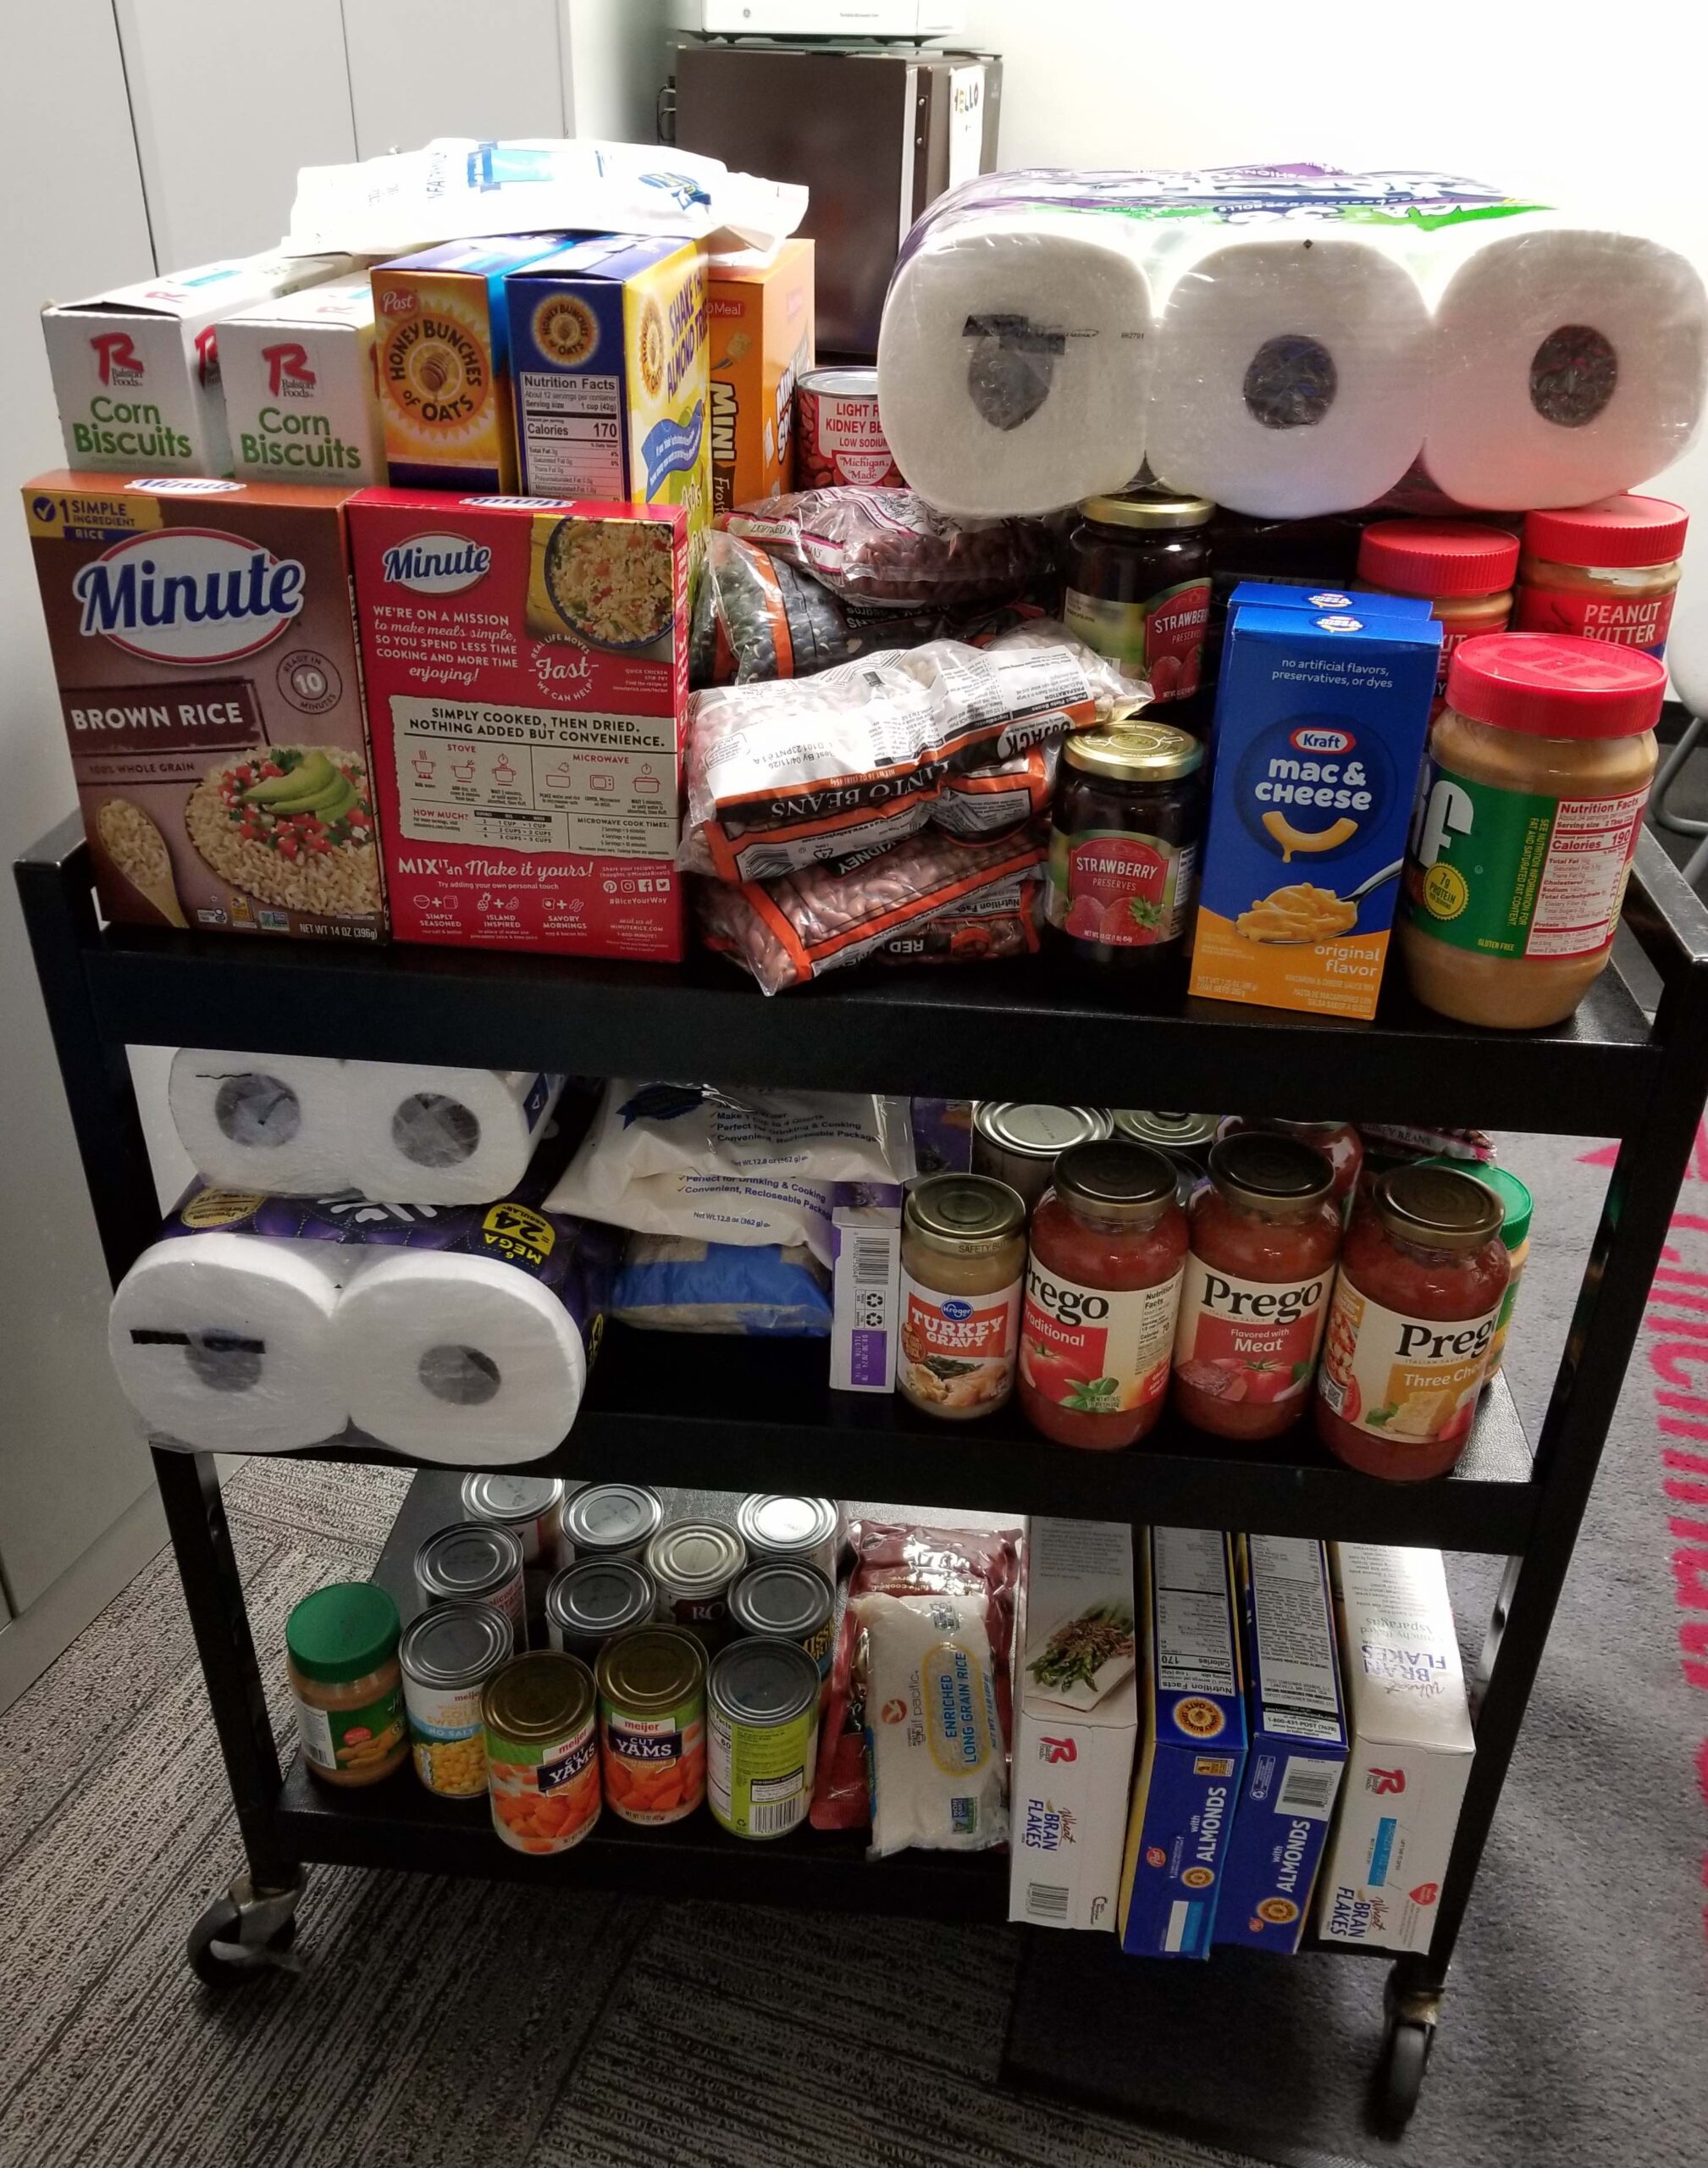 Donations to the Food Pantry from the Tutoring Center team